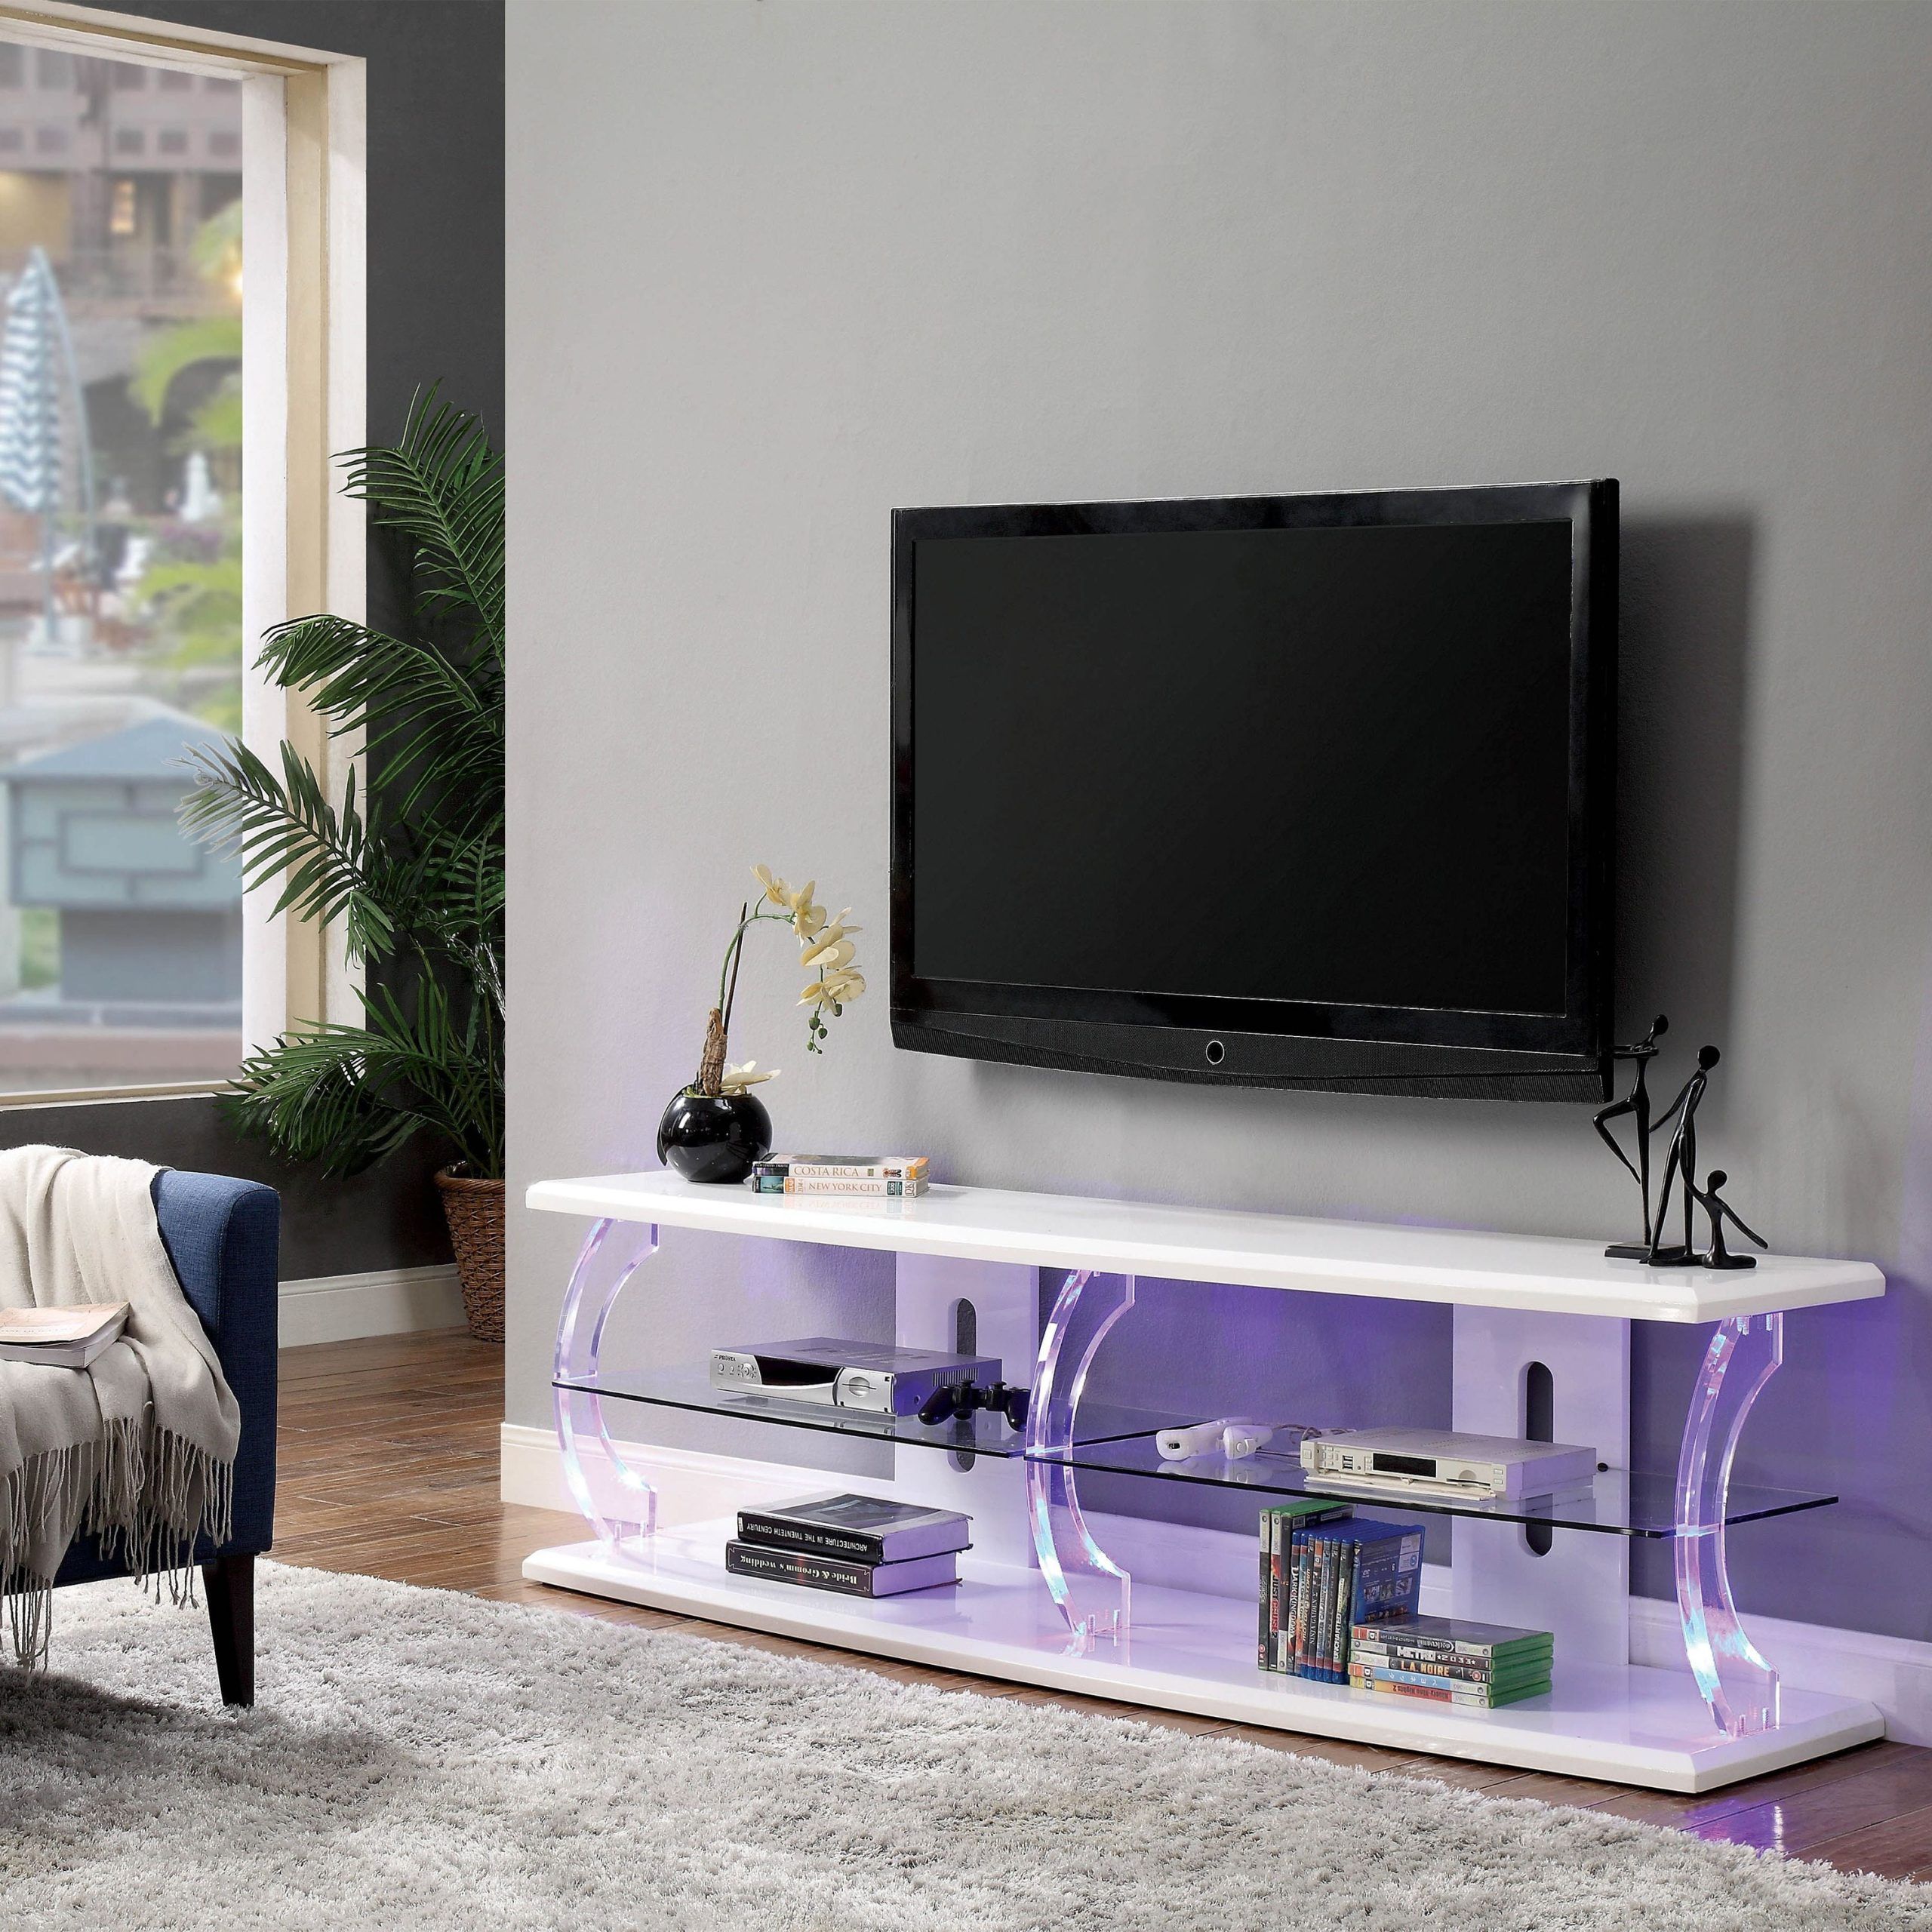 Furniture Of America Vedot Contemporary Led Tv Stand, 72", White And In Tv Stands With Led Lights &amp; Power Outlet (View 4 of 20)